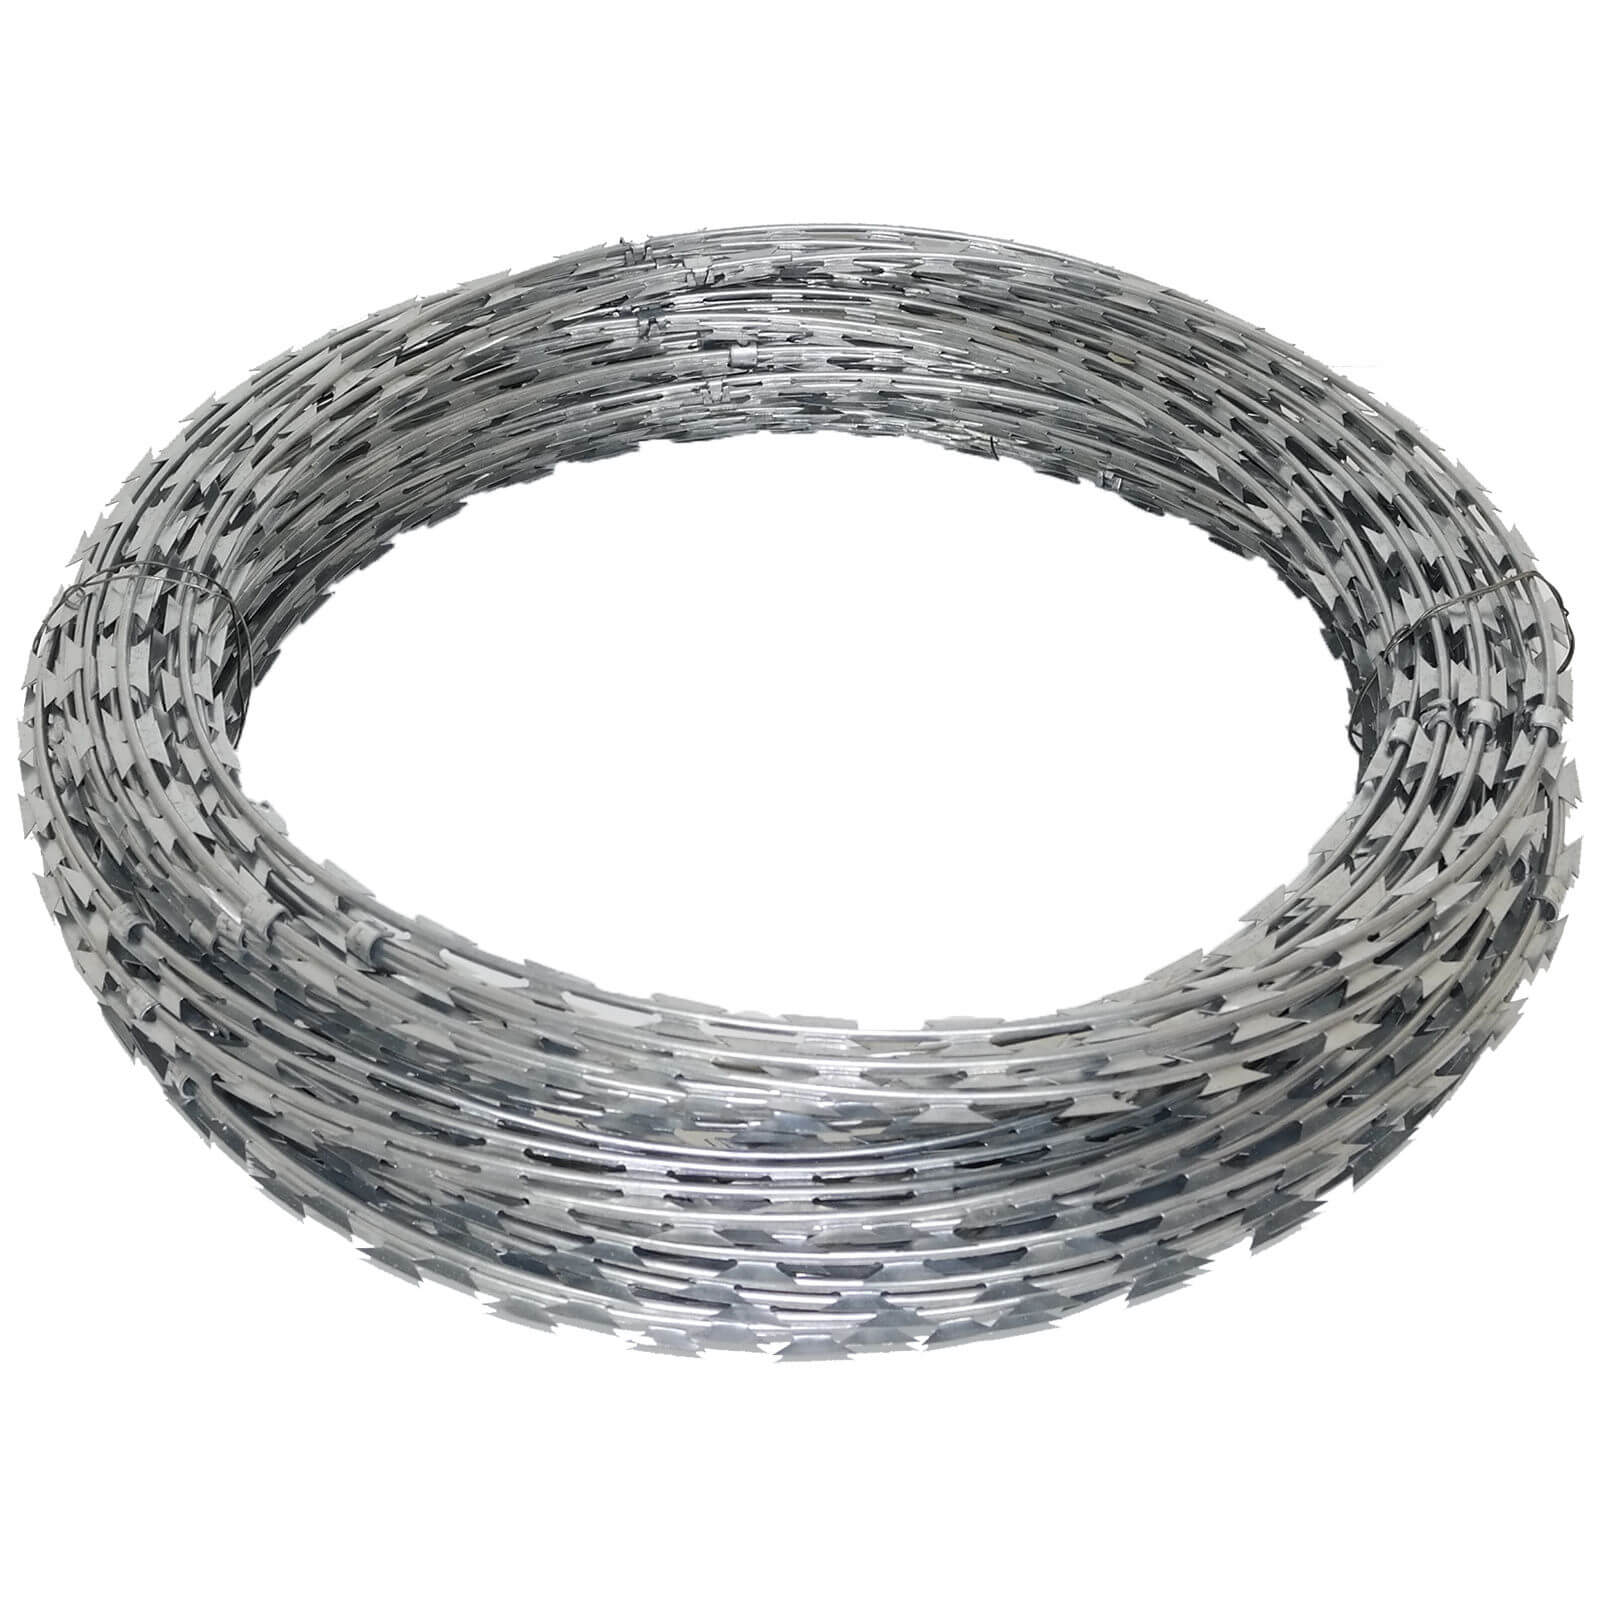 Razor wire fences - effective protection against break-ins and theft